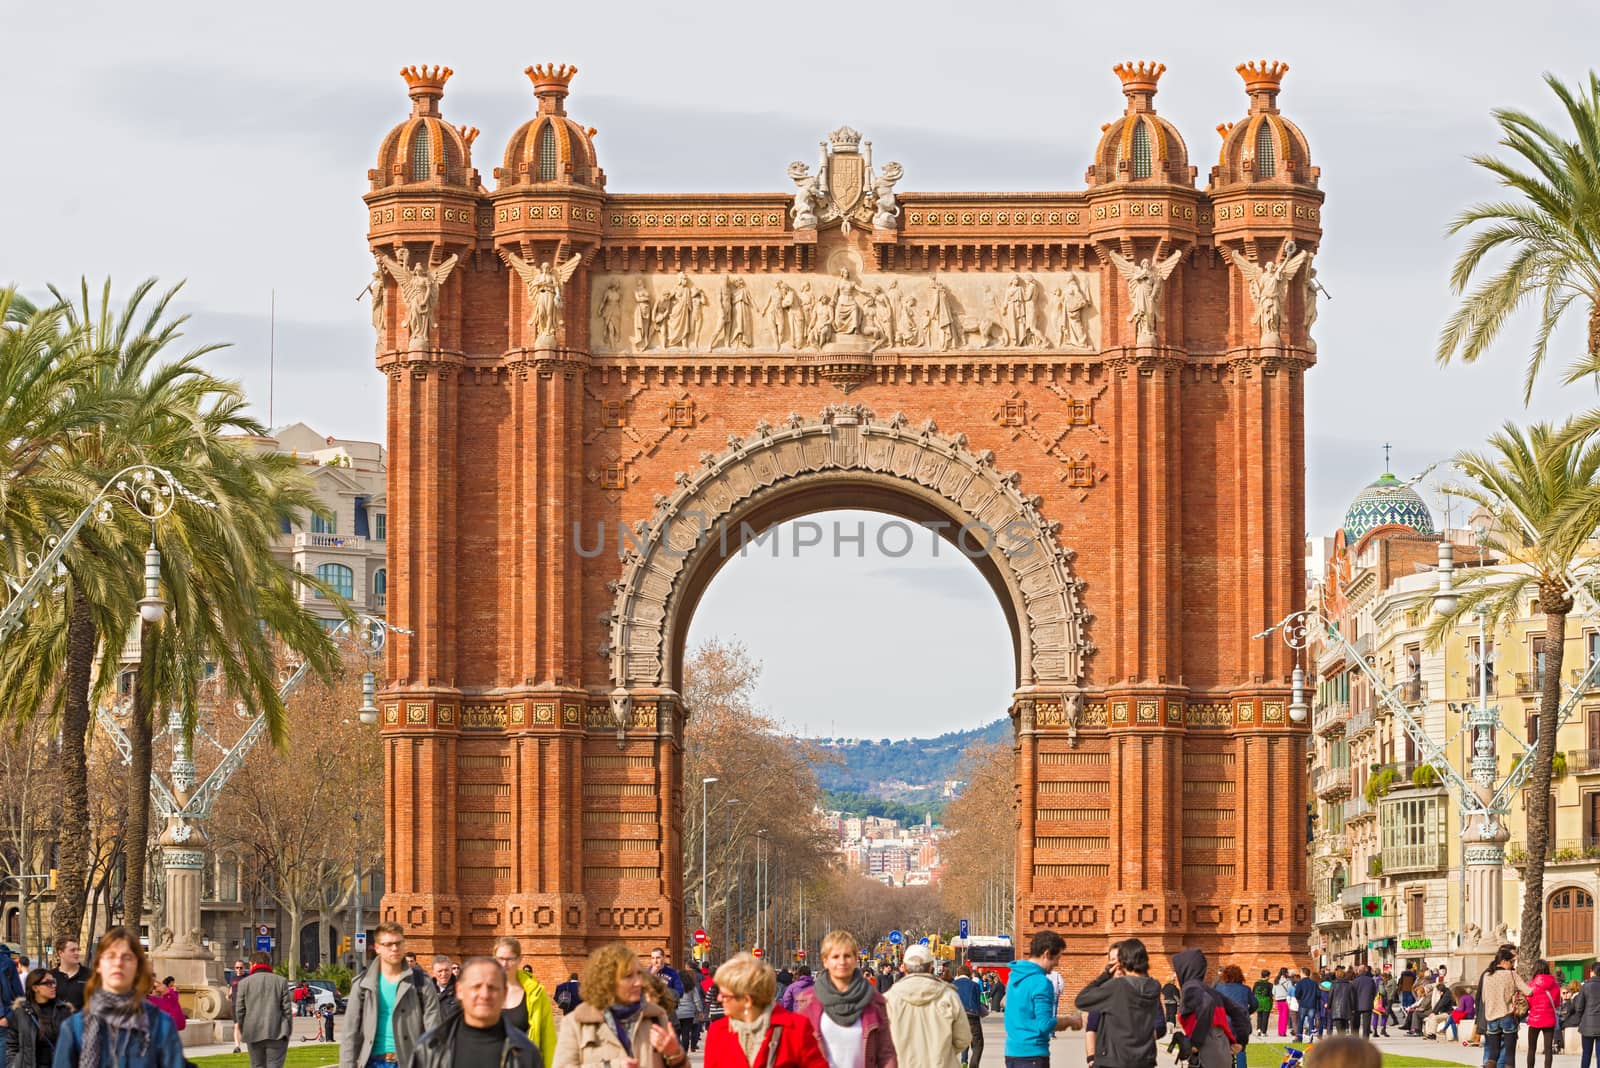 The Arch de Triumph in Barcelona, Spain. by Marcus